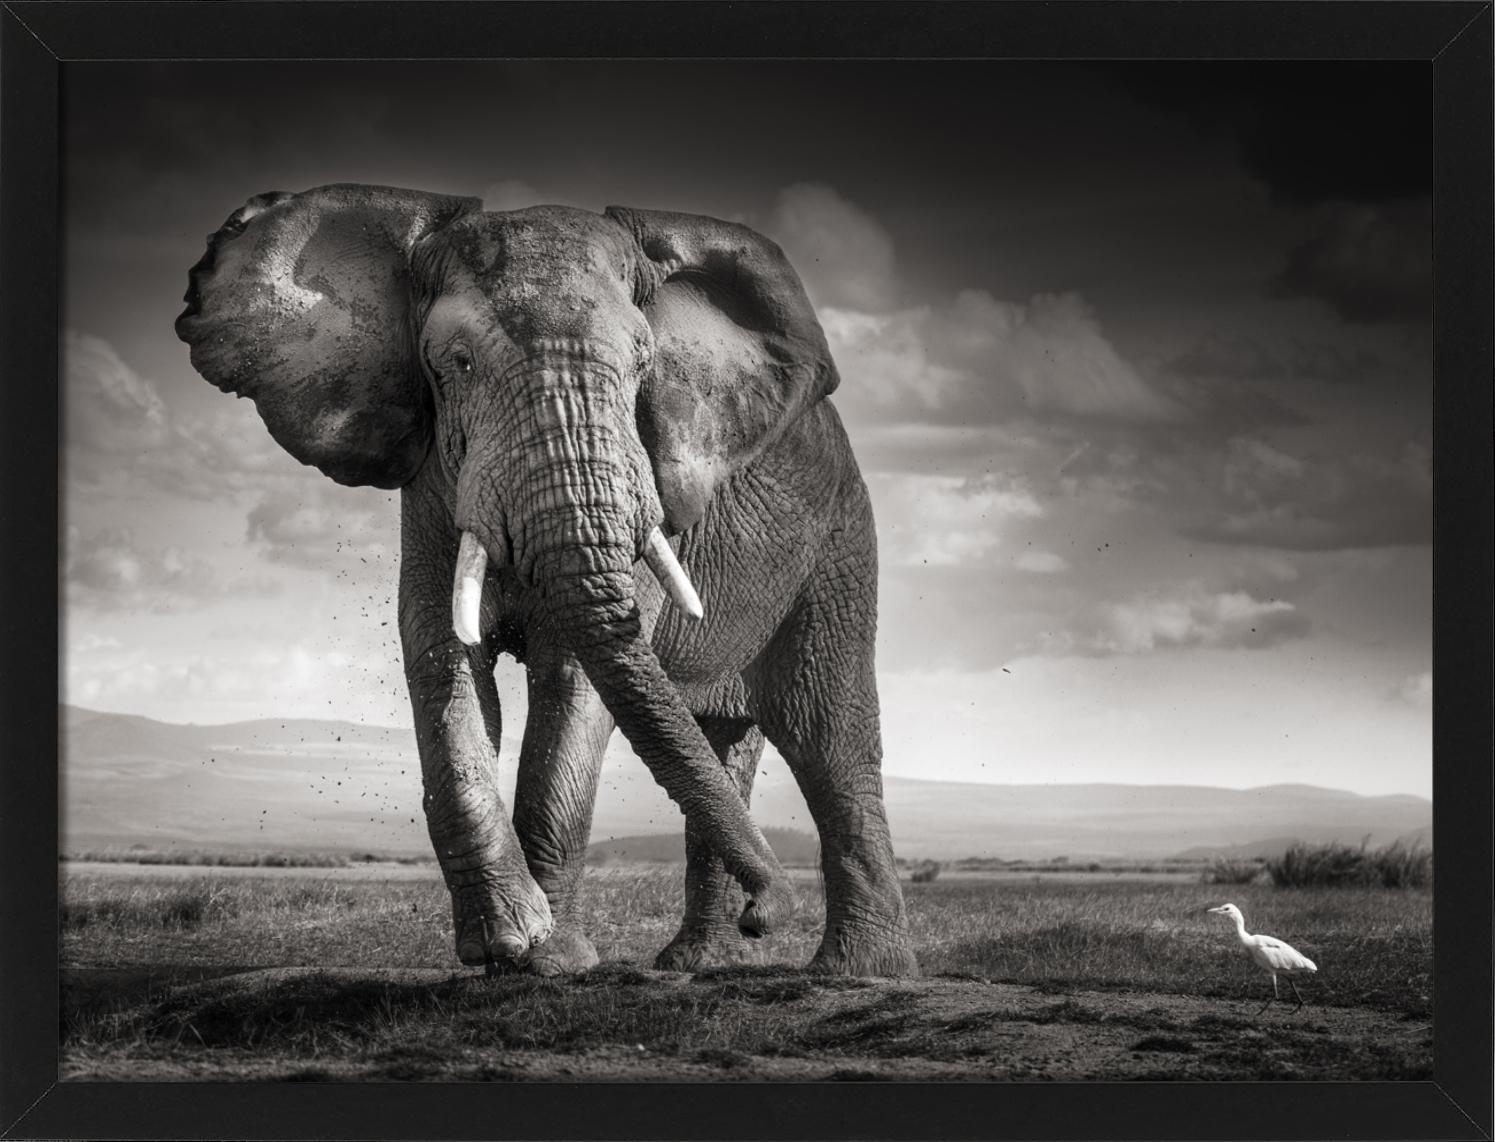 All prints are limited edition. Available in multiple sizes. High-end framing on request.

All prints are done and signed by the artist. The collector receives an additional certificate of authenticity from the gallery.

Elephants are the biggest